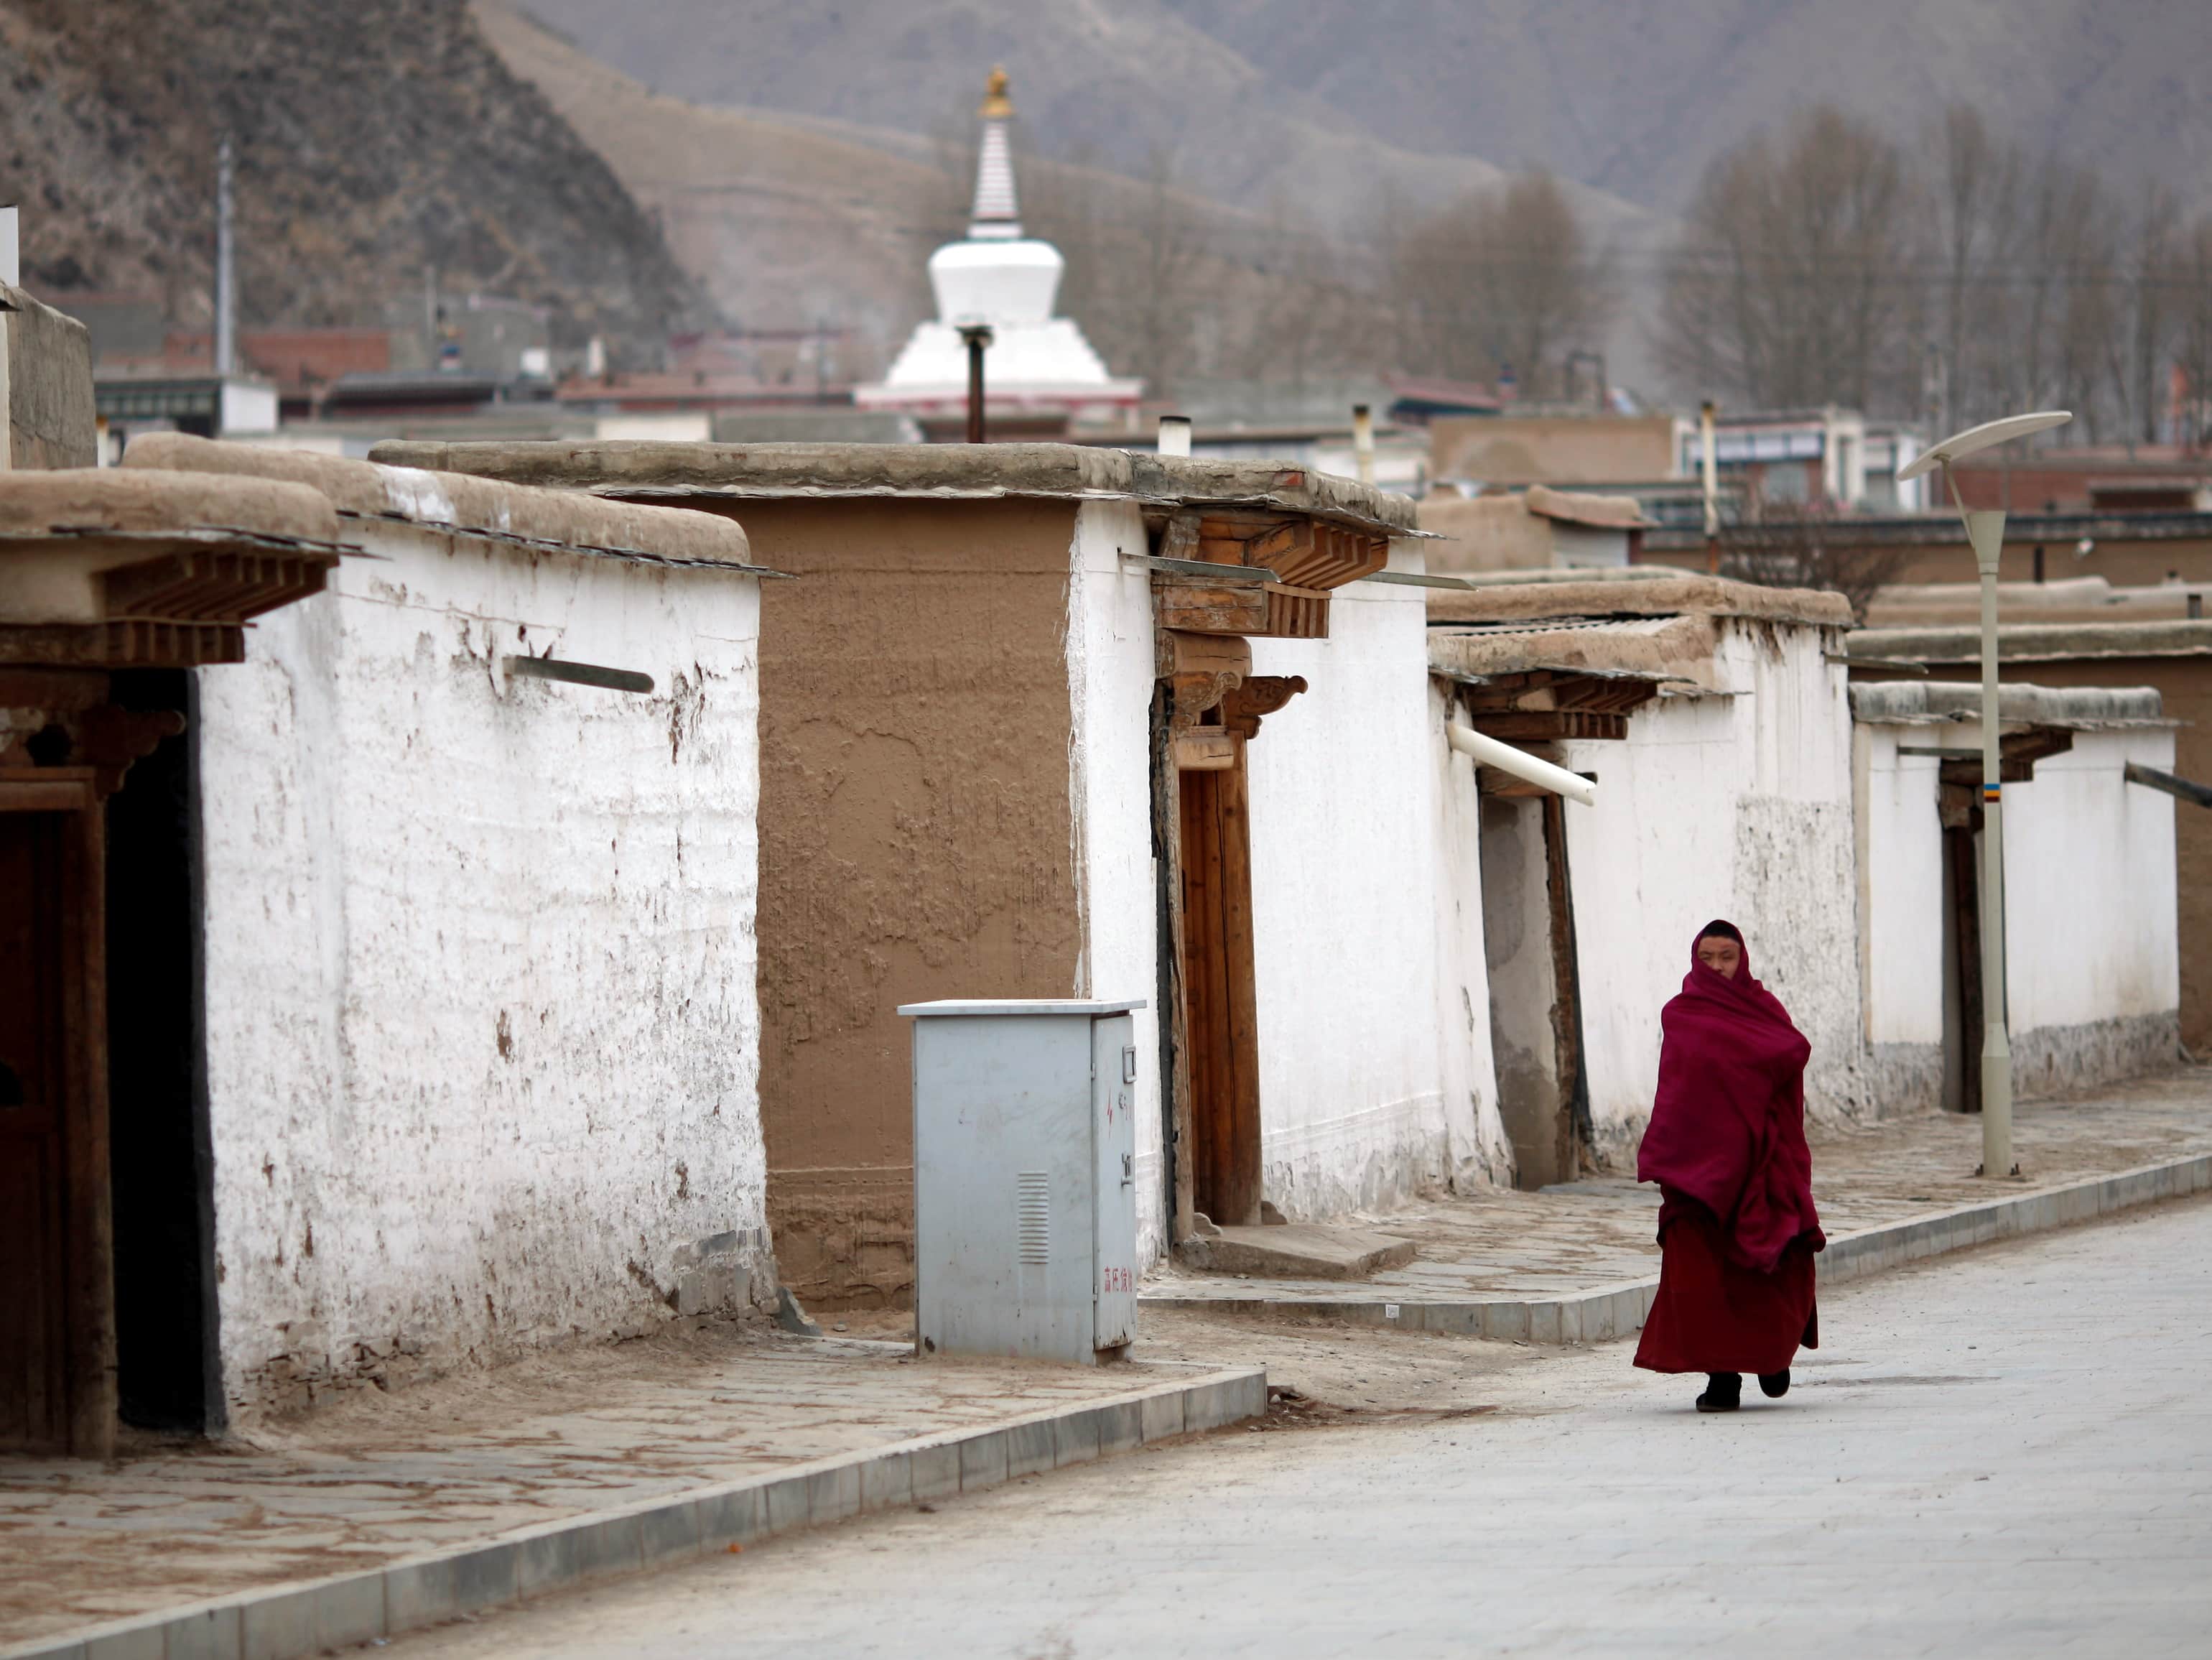 A Tibetan monk at Labrang Monastery in Gansu Province, 11 February 2013; China introduced a new system of information gathering to monitor monks and nuns in Tibetan monasteries in 2011, REUTERS/Carlos Barria